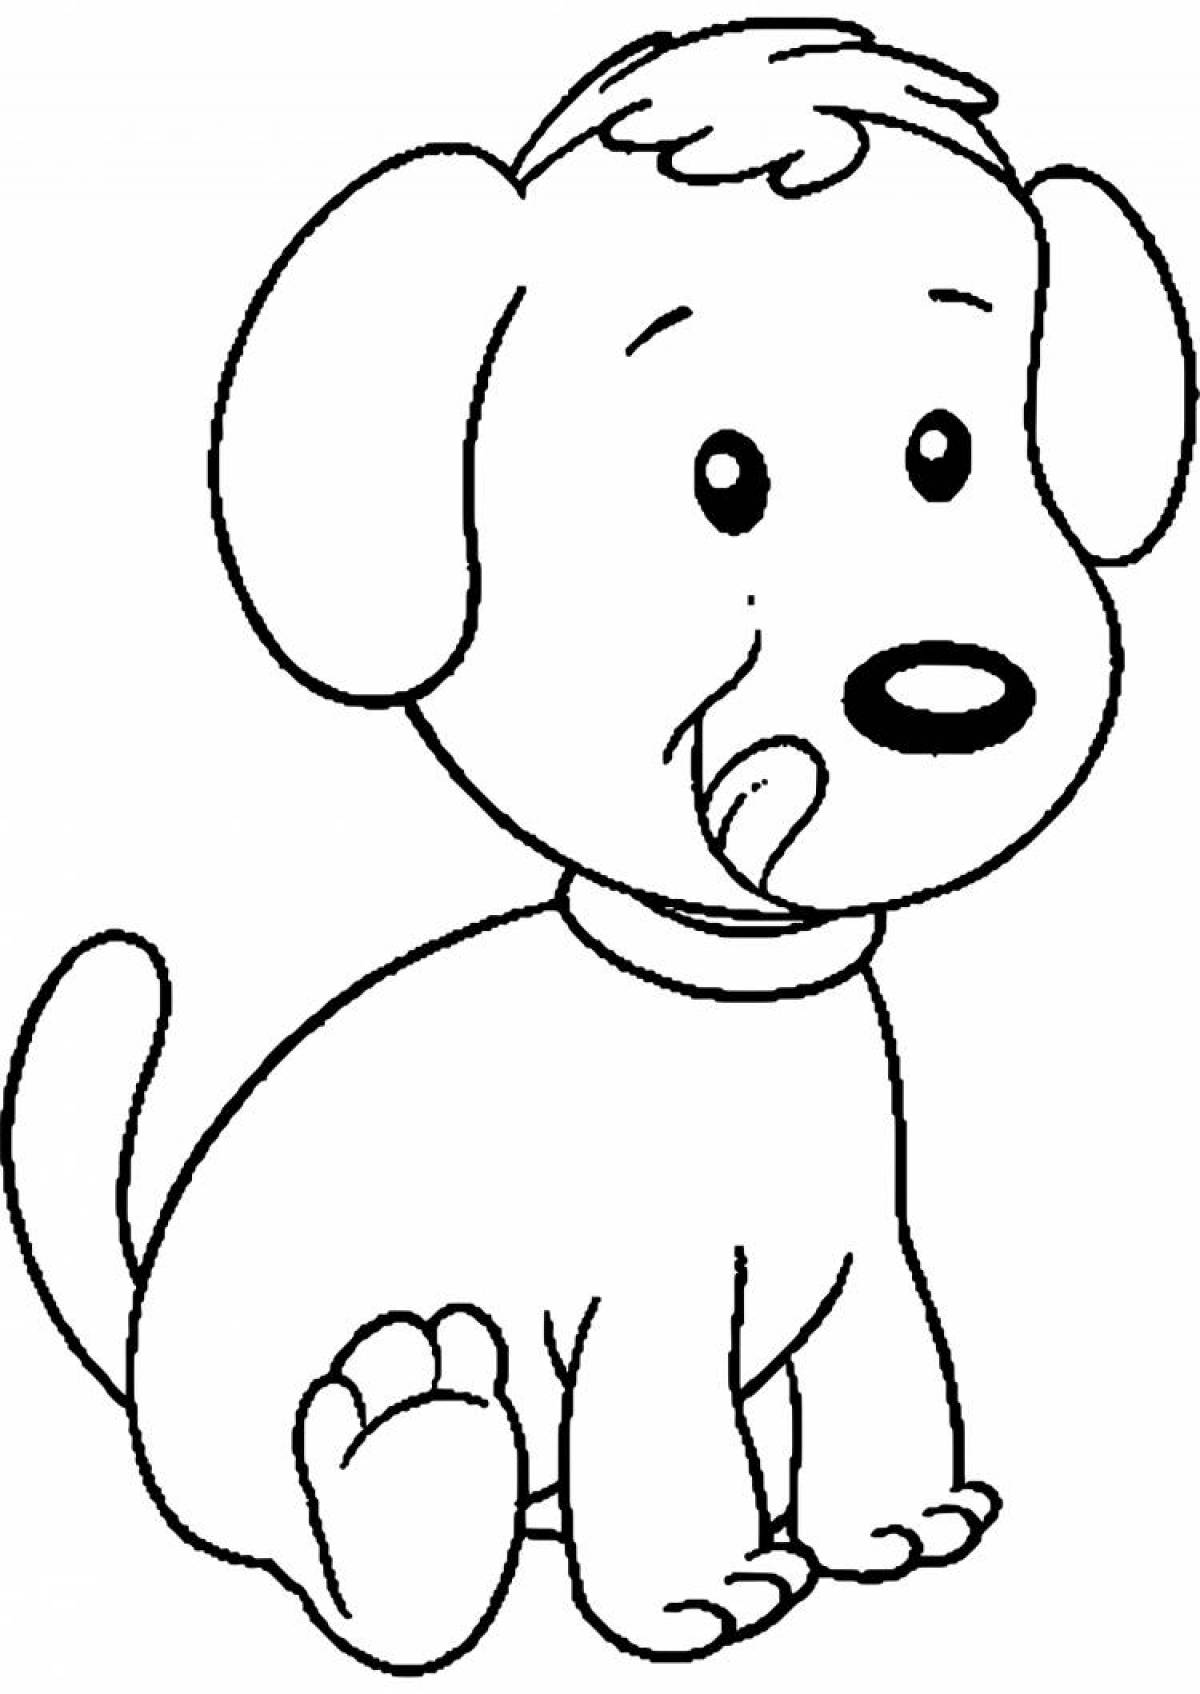 Adorable dog coloring book for students